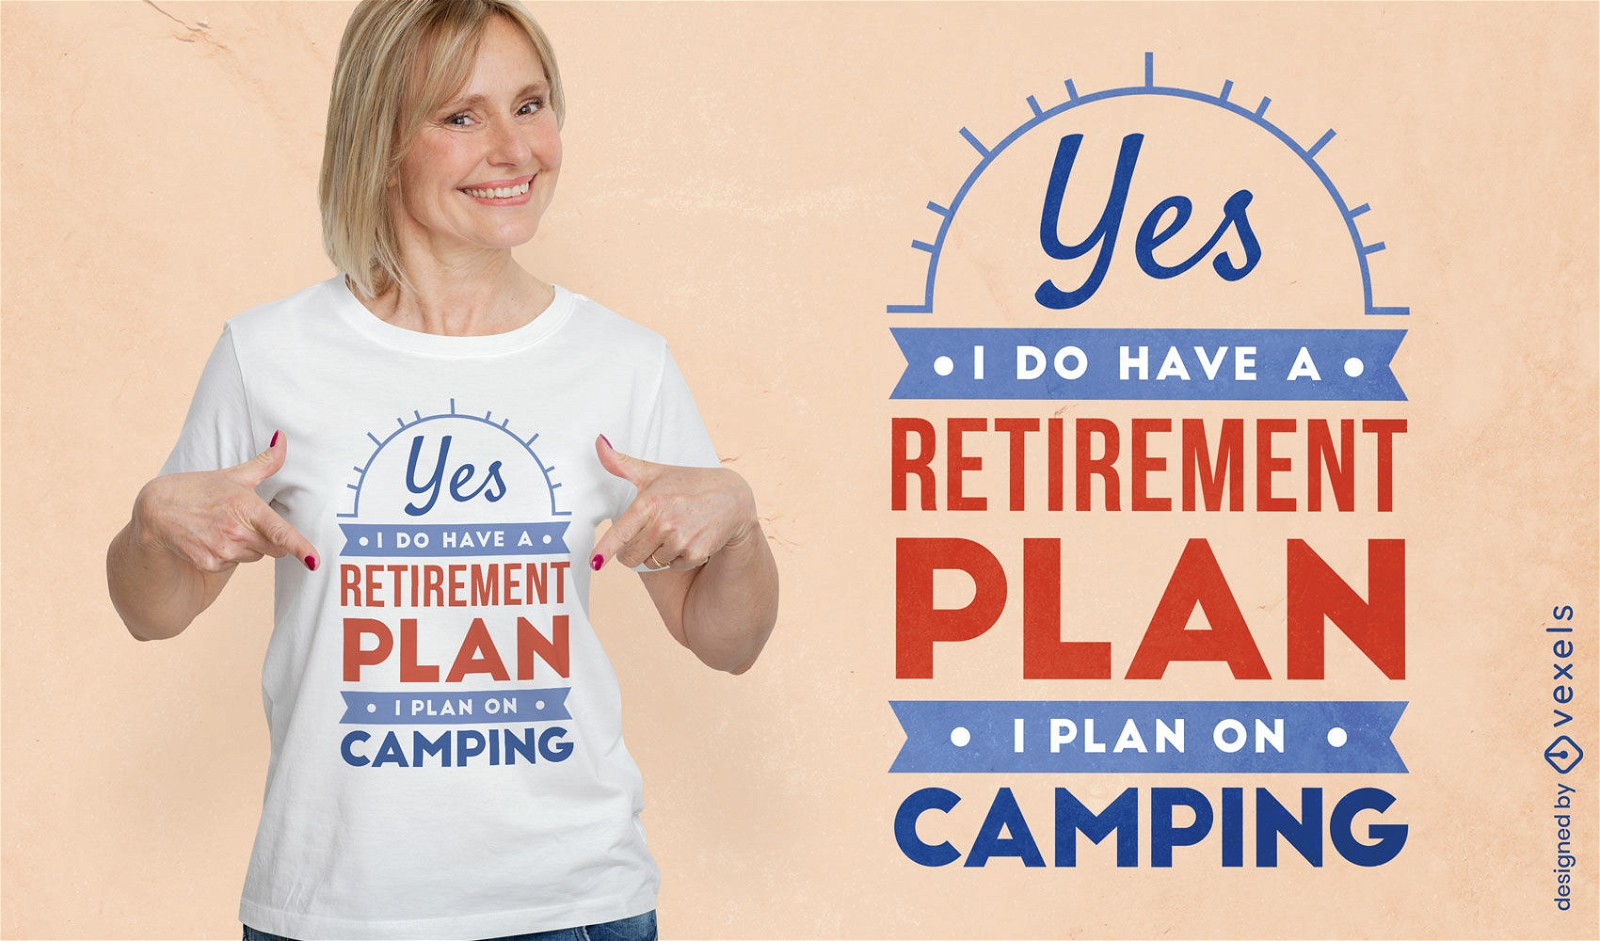 Retirement and camping t-shirt design